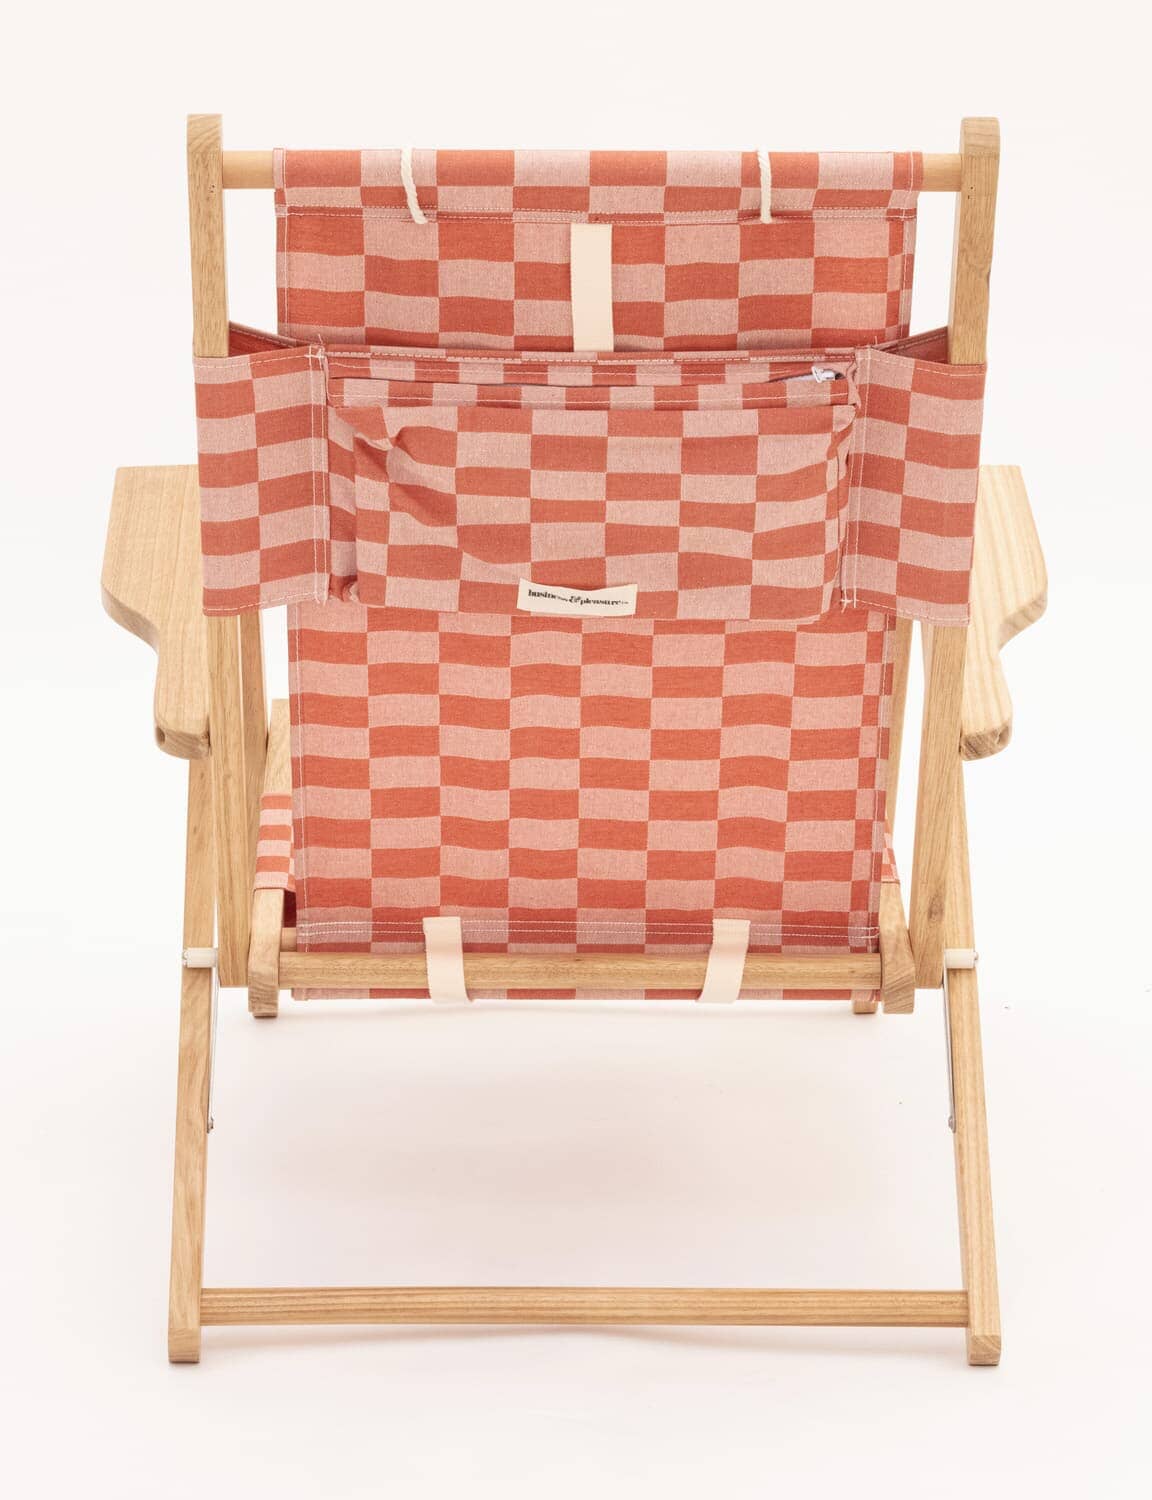 Studio image of sirenuse check tommy chair